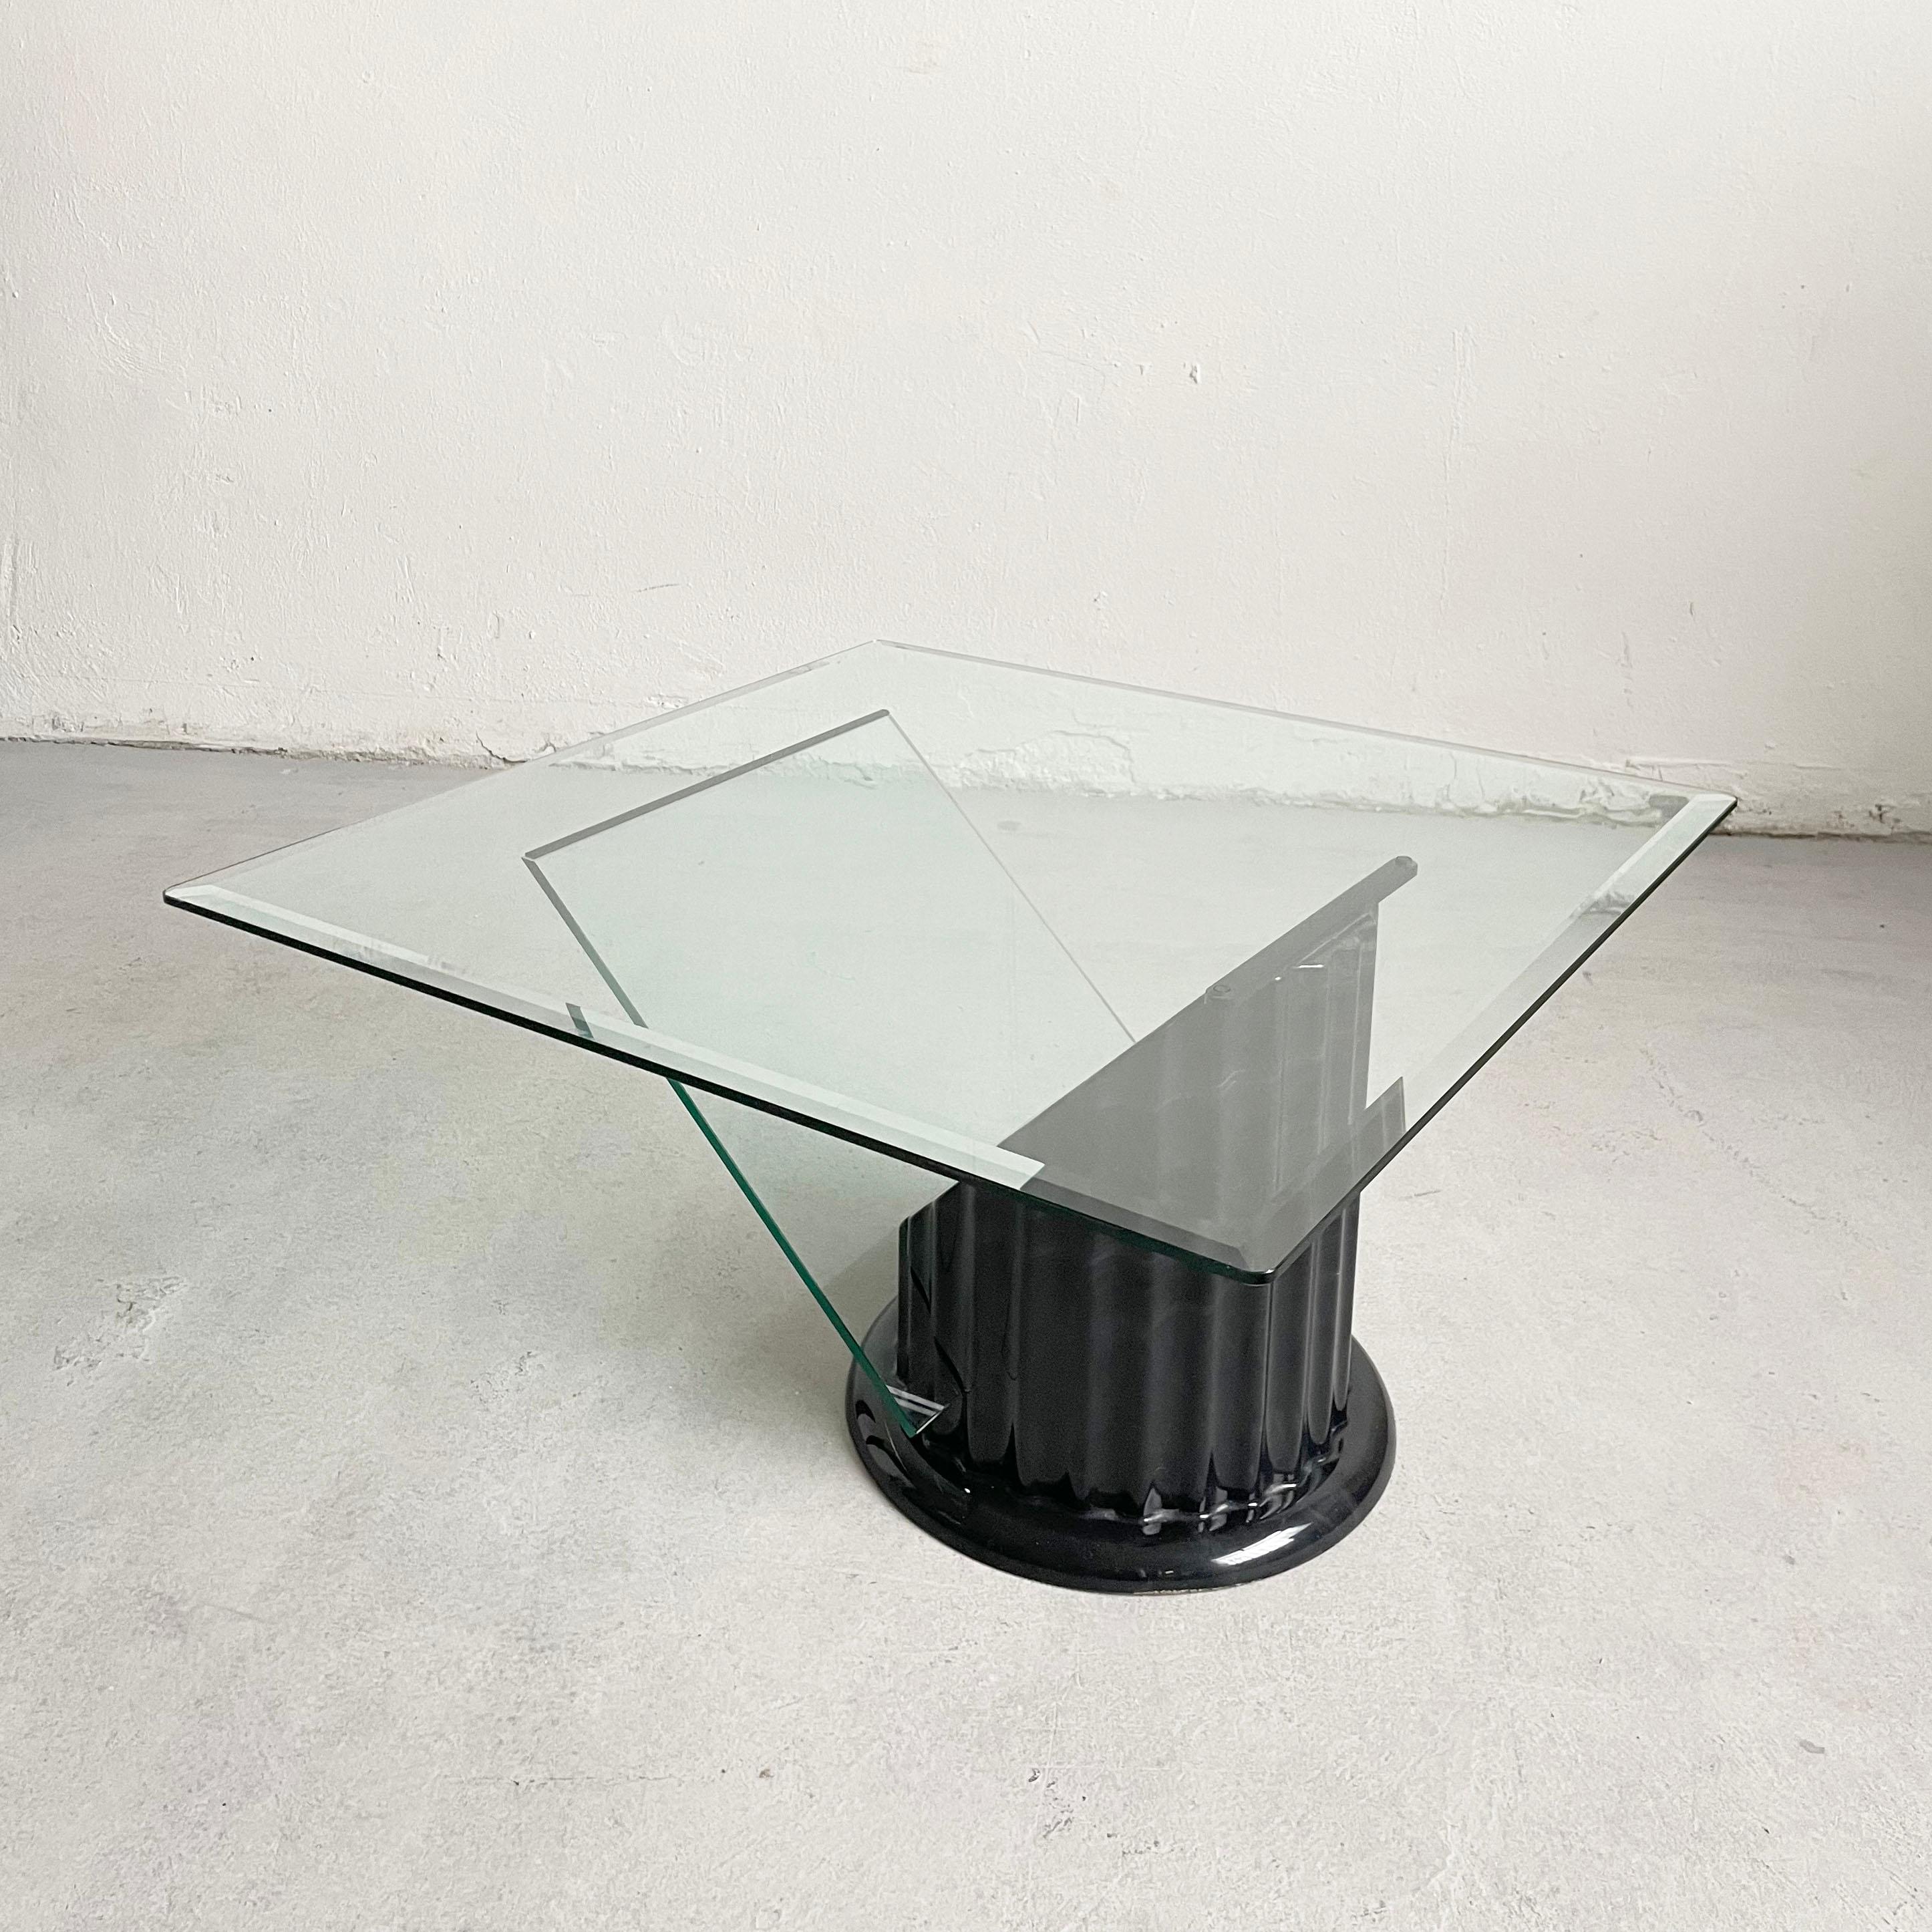 Postmodern Sculptural Coffee Table, Black Faux Marble and Glass, 1980s For Sale 8